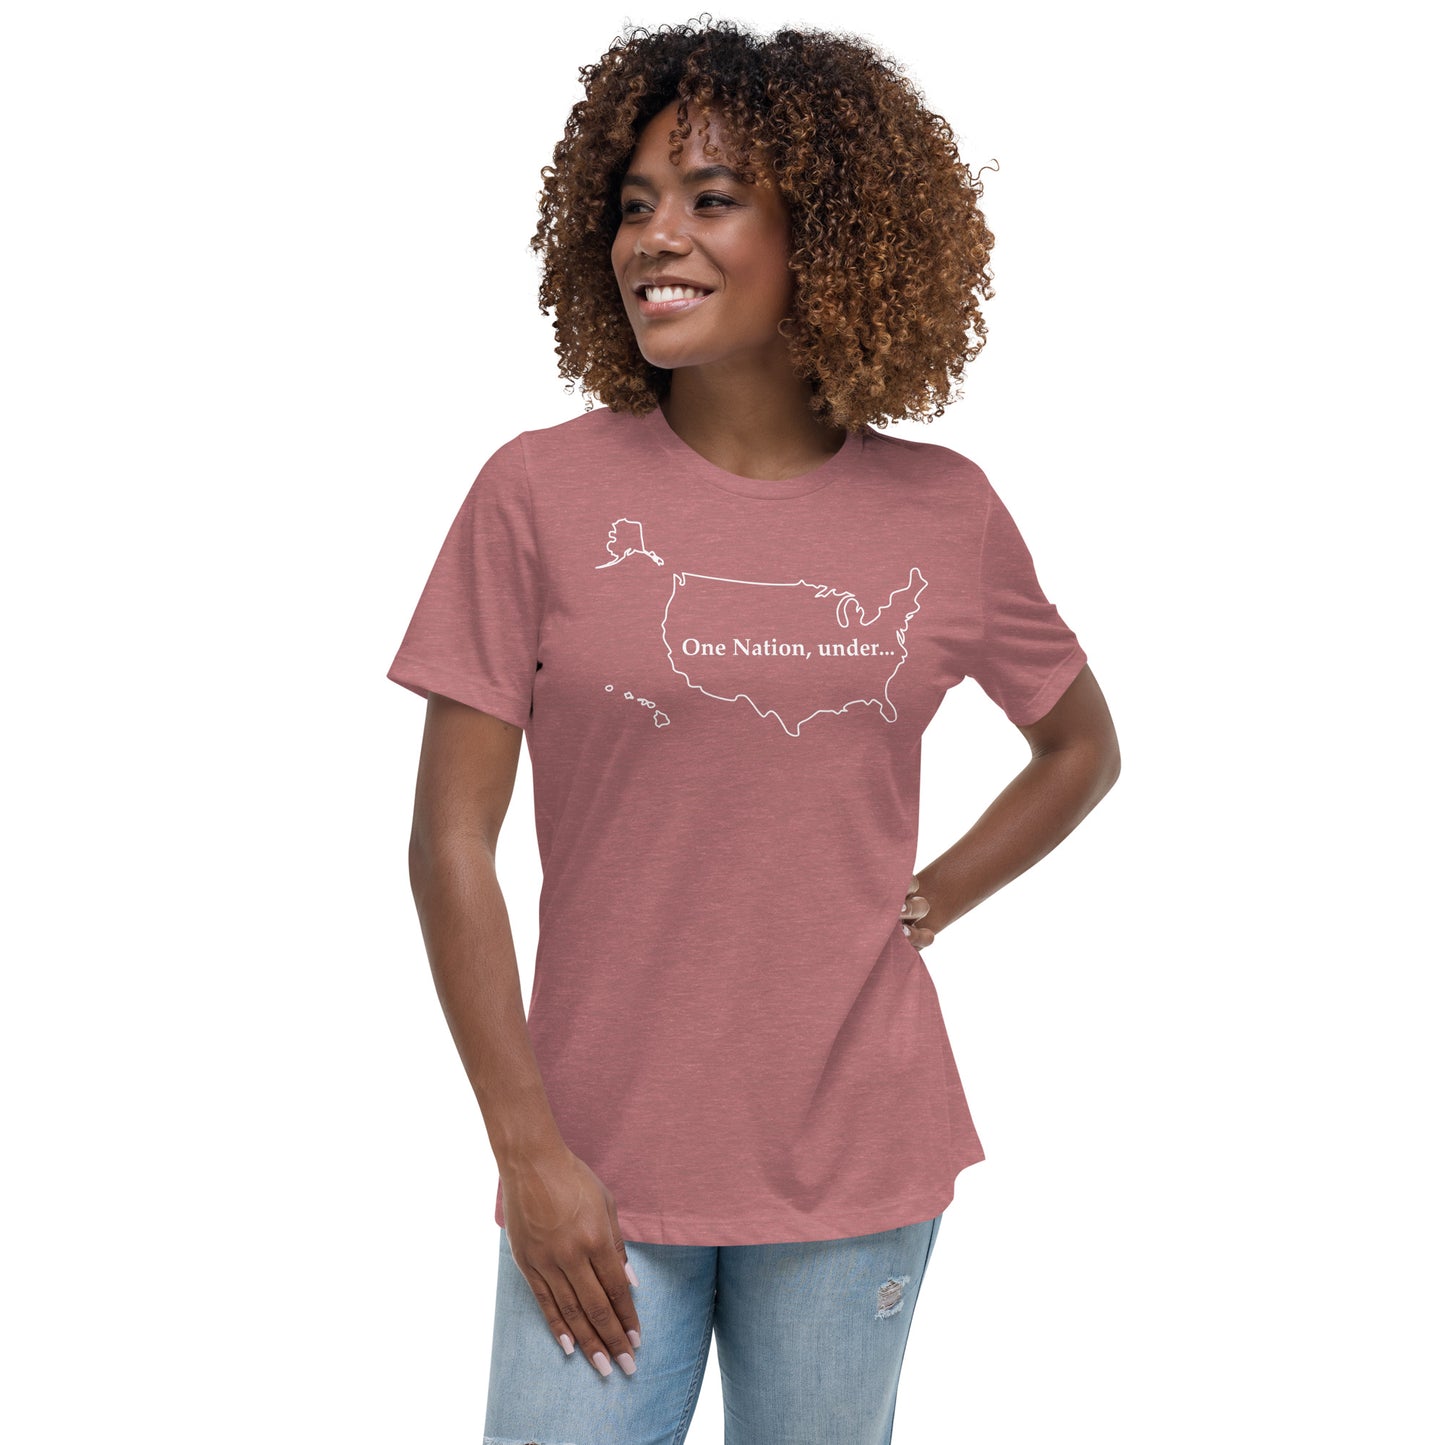 Women's Believe in God and have no religious affiliation t-shirt